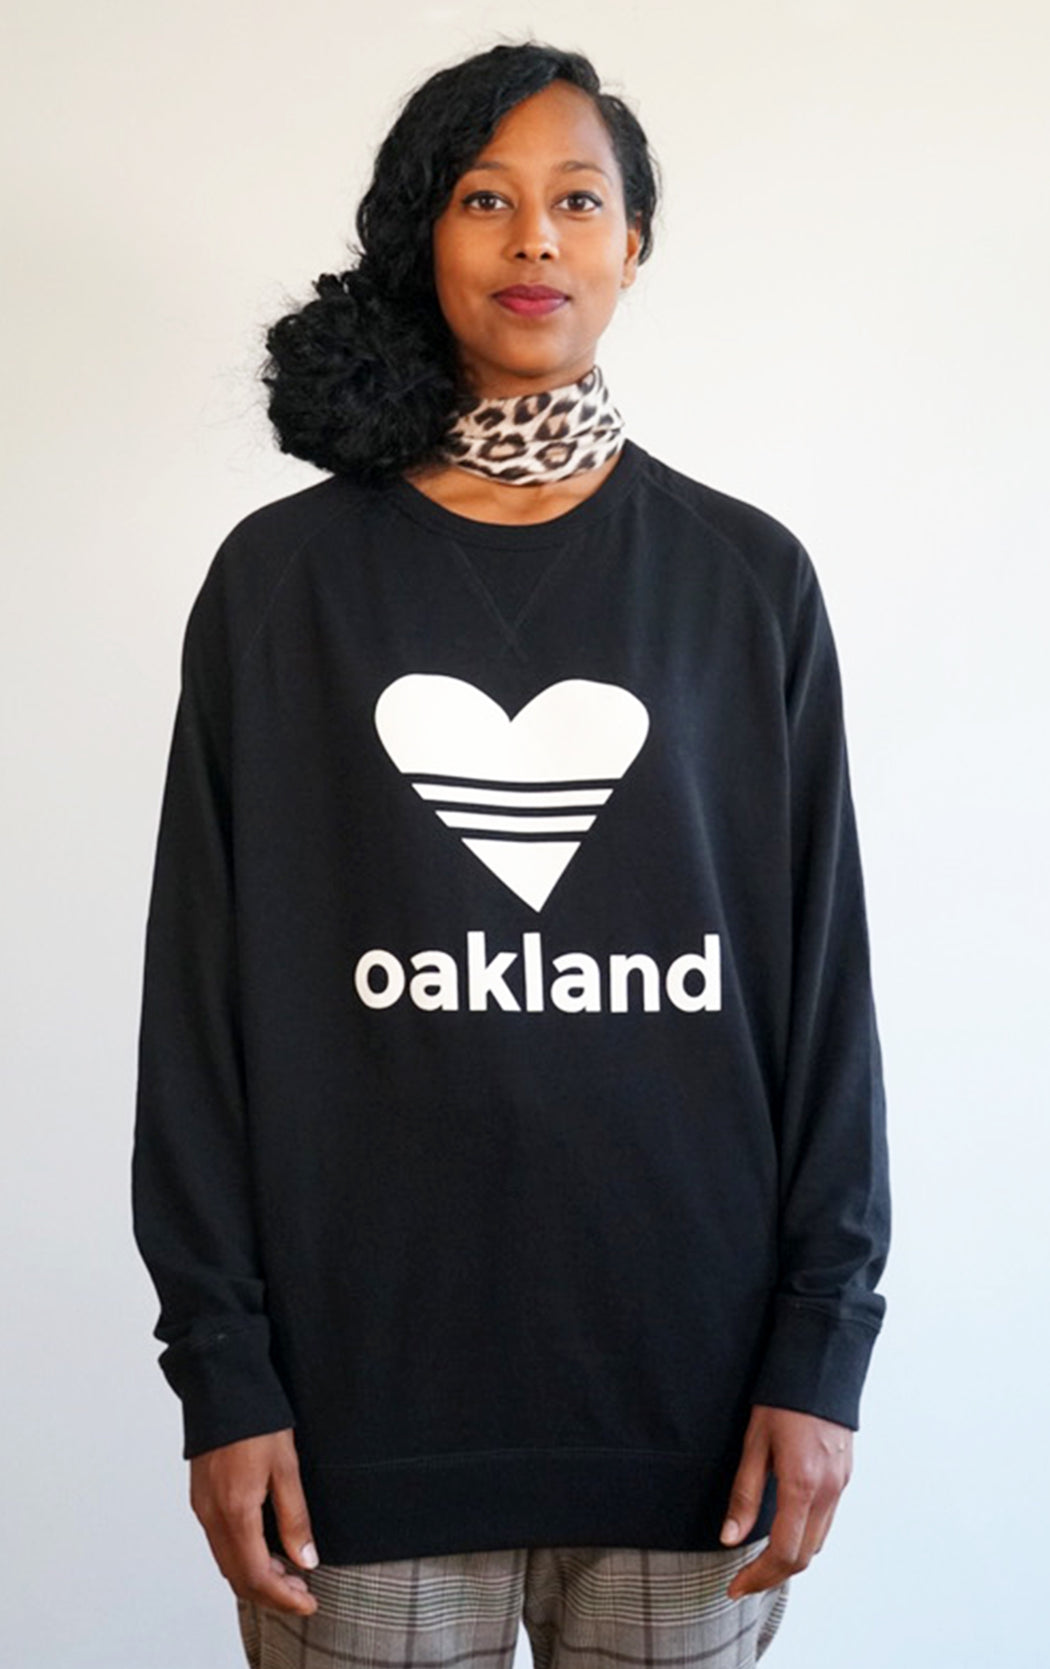 black super soft love oakland sweatshirt in a cool crew neck style made in a soft cotton blend with love oakland heart graphic on front 